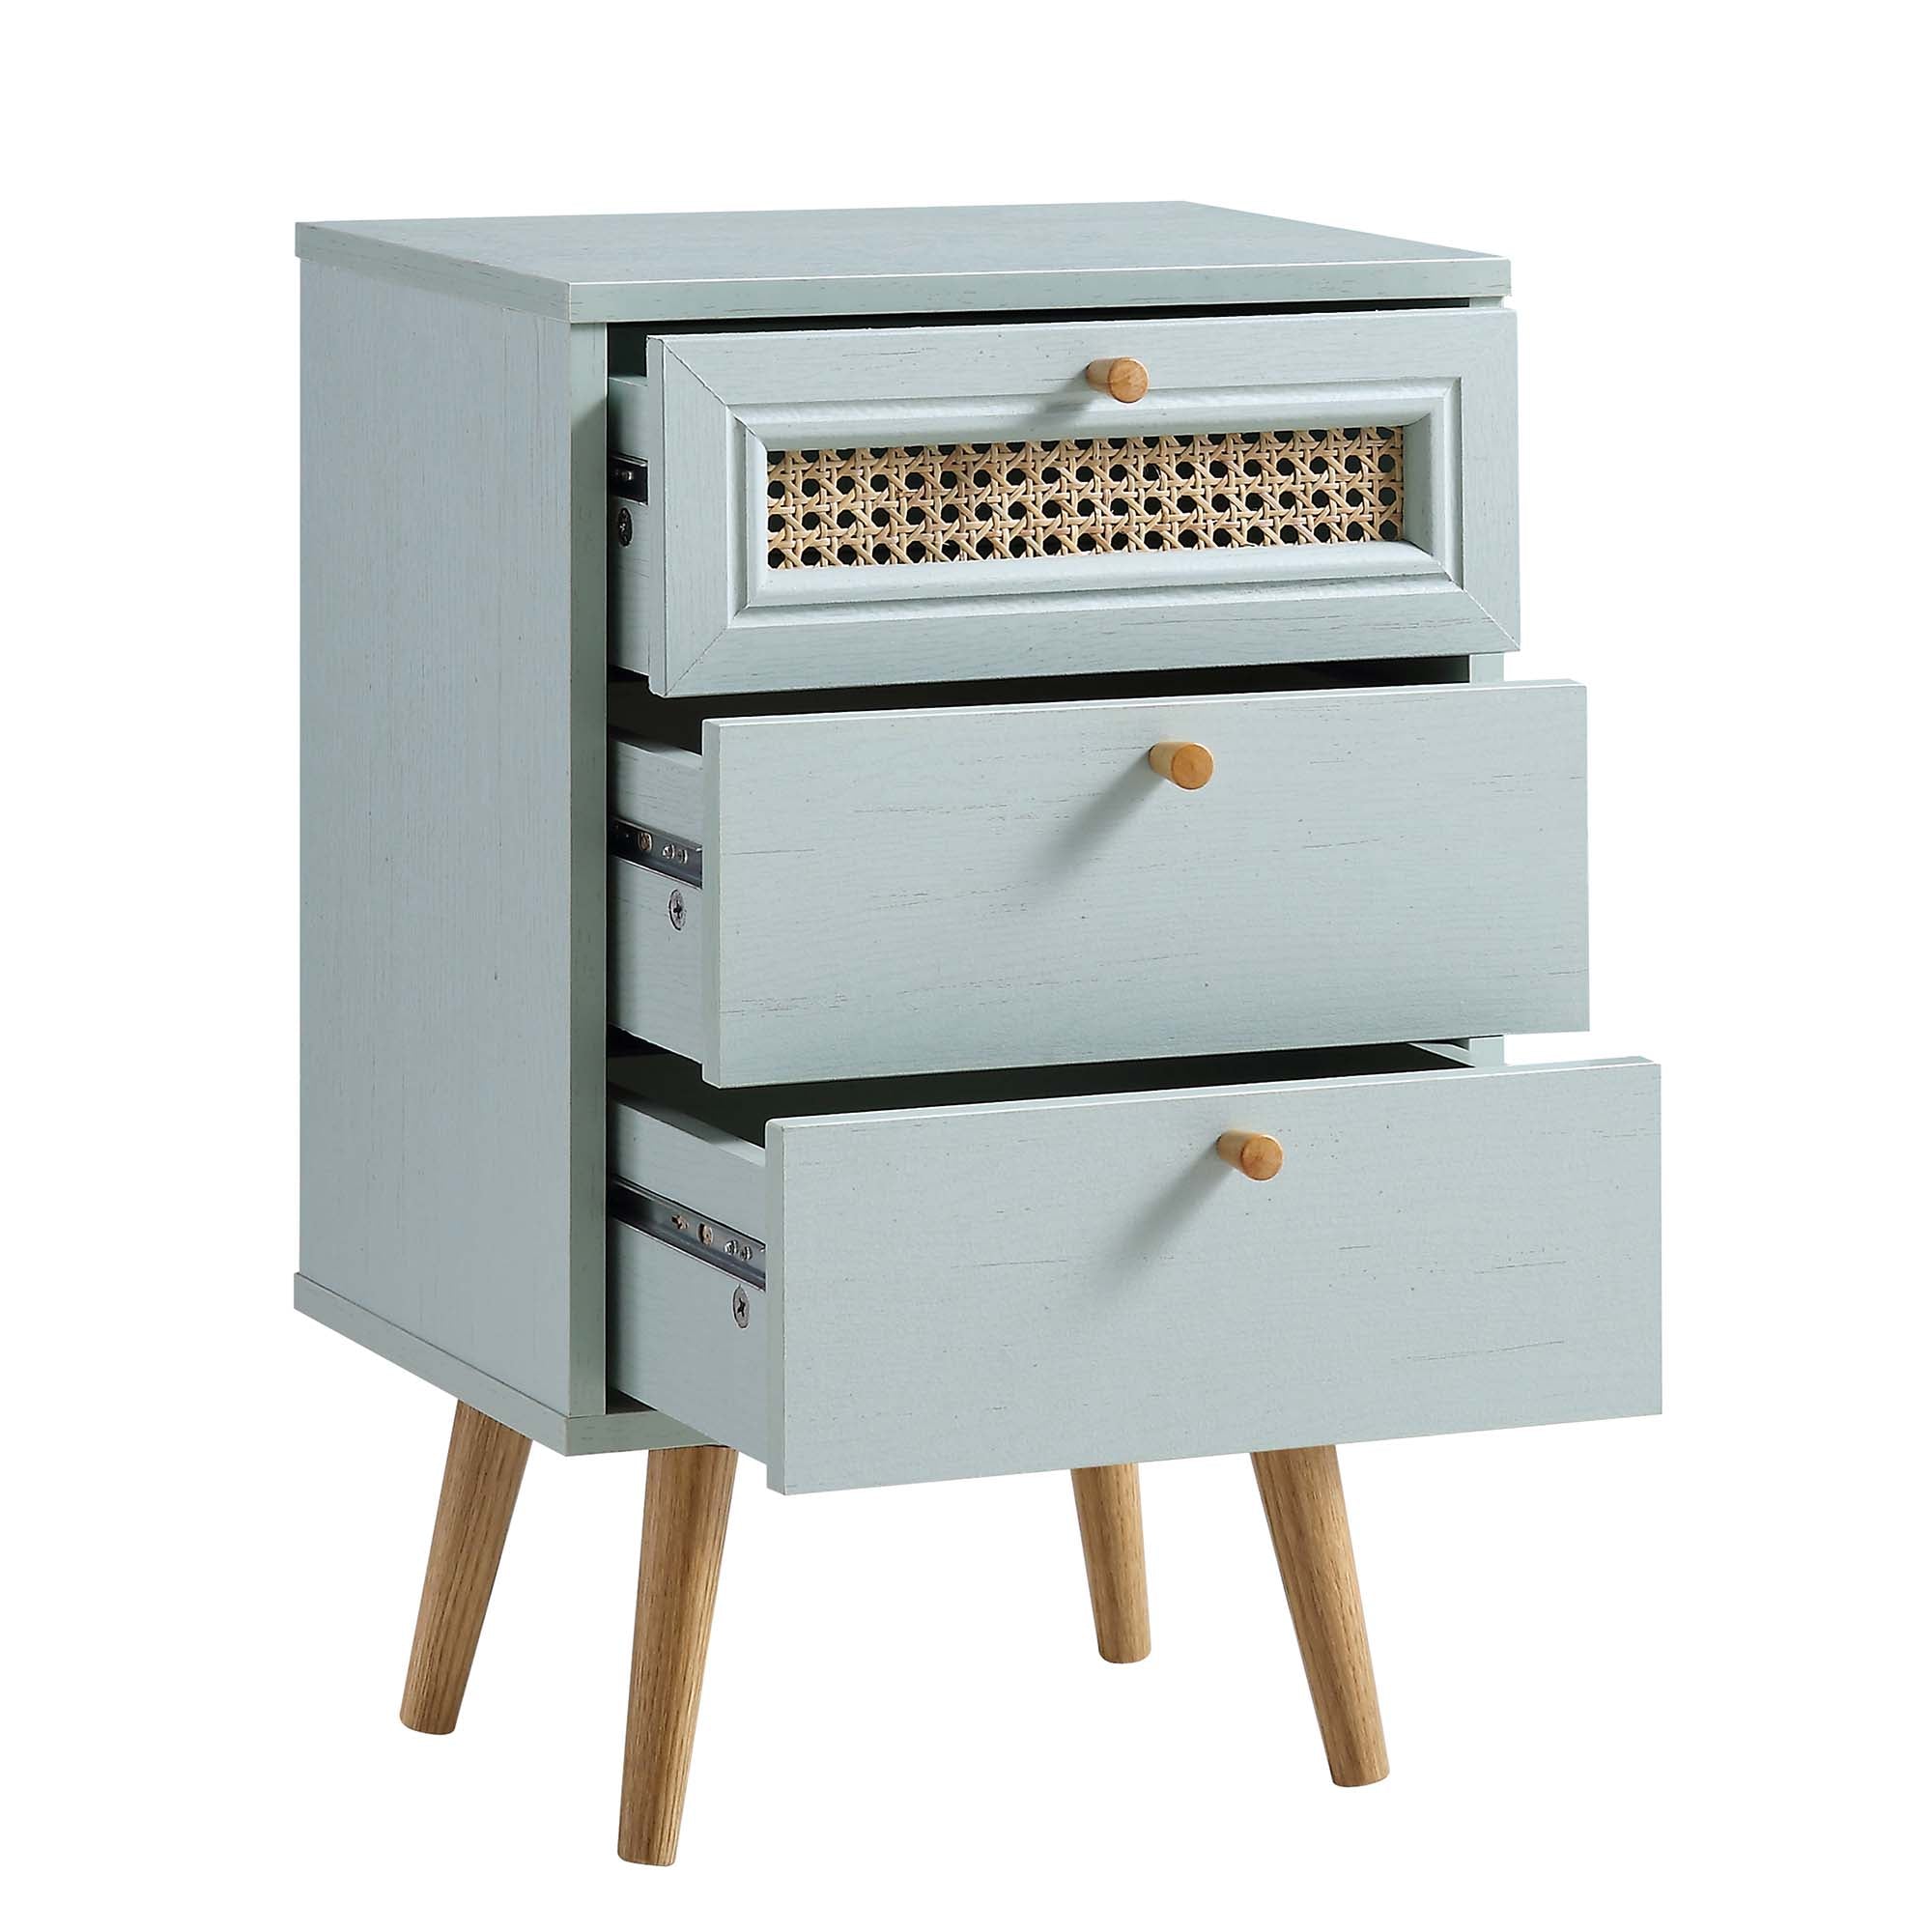 Anya Woven Rattan 3-Drawer Bedside Table in Mint Colour